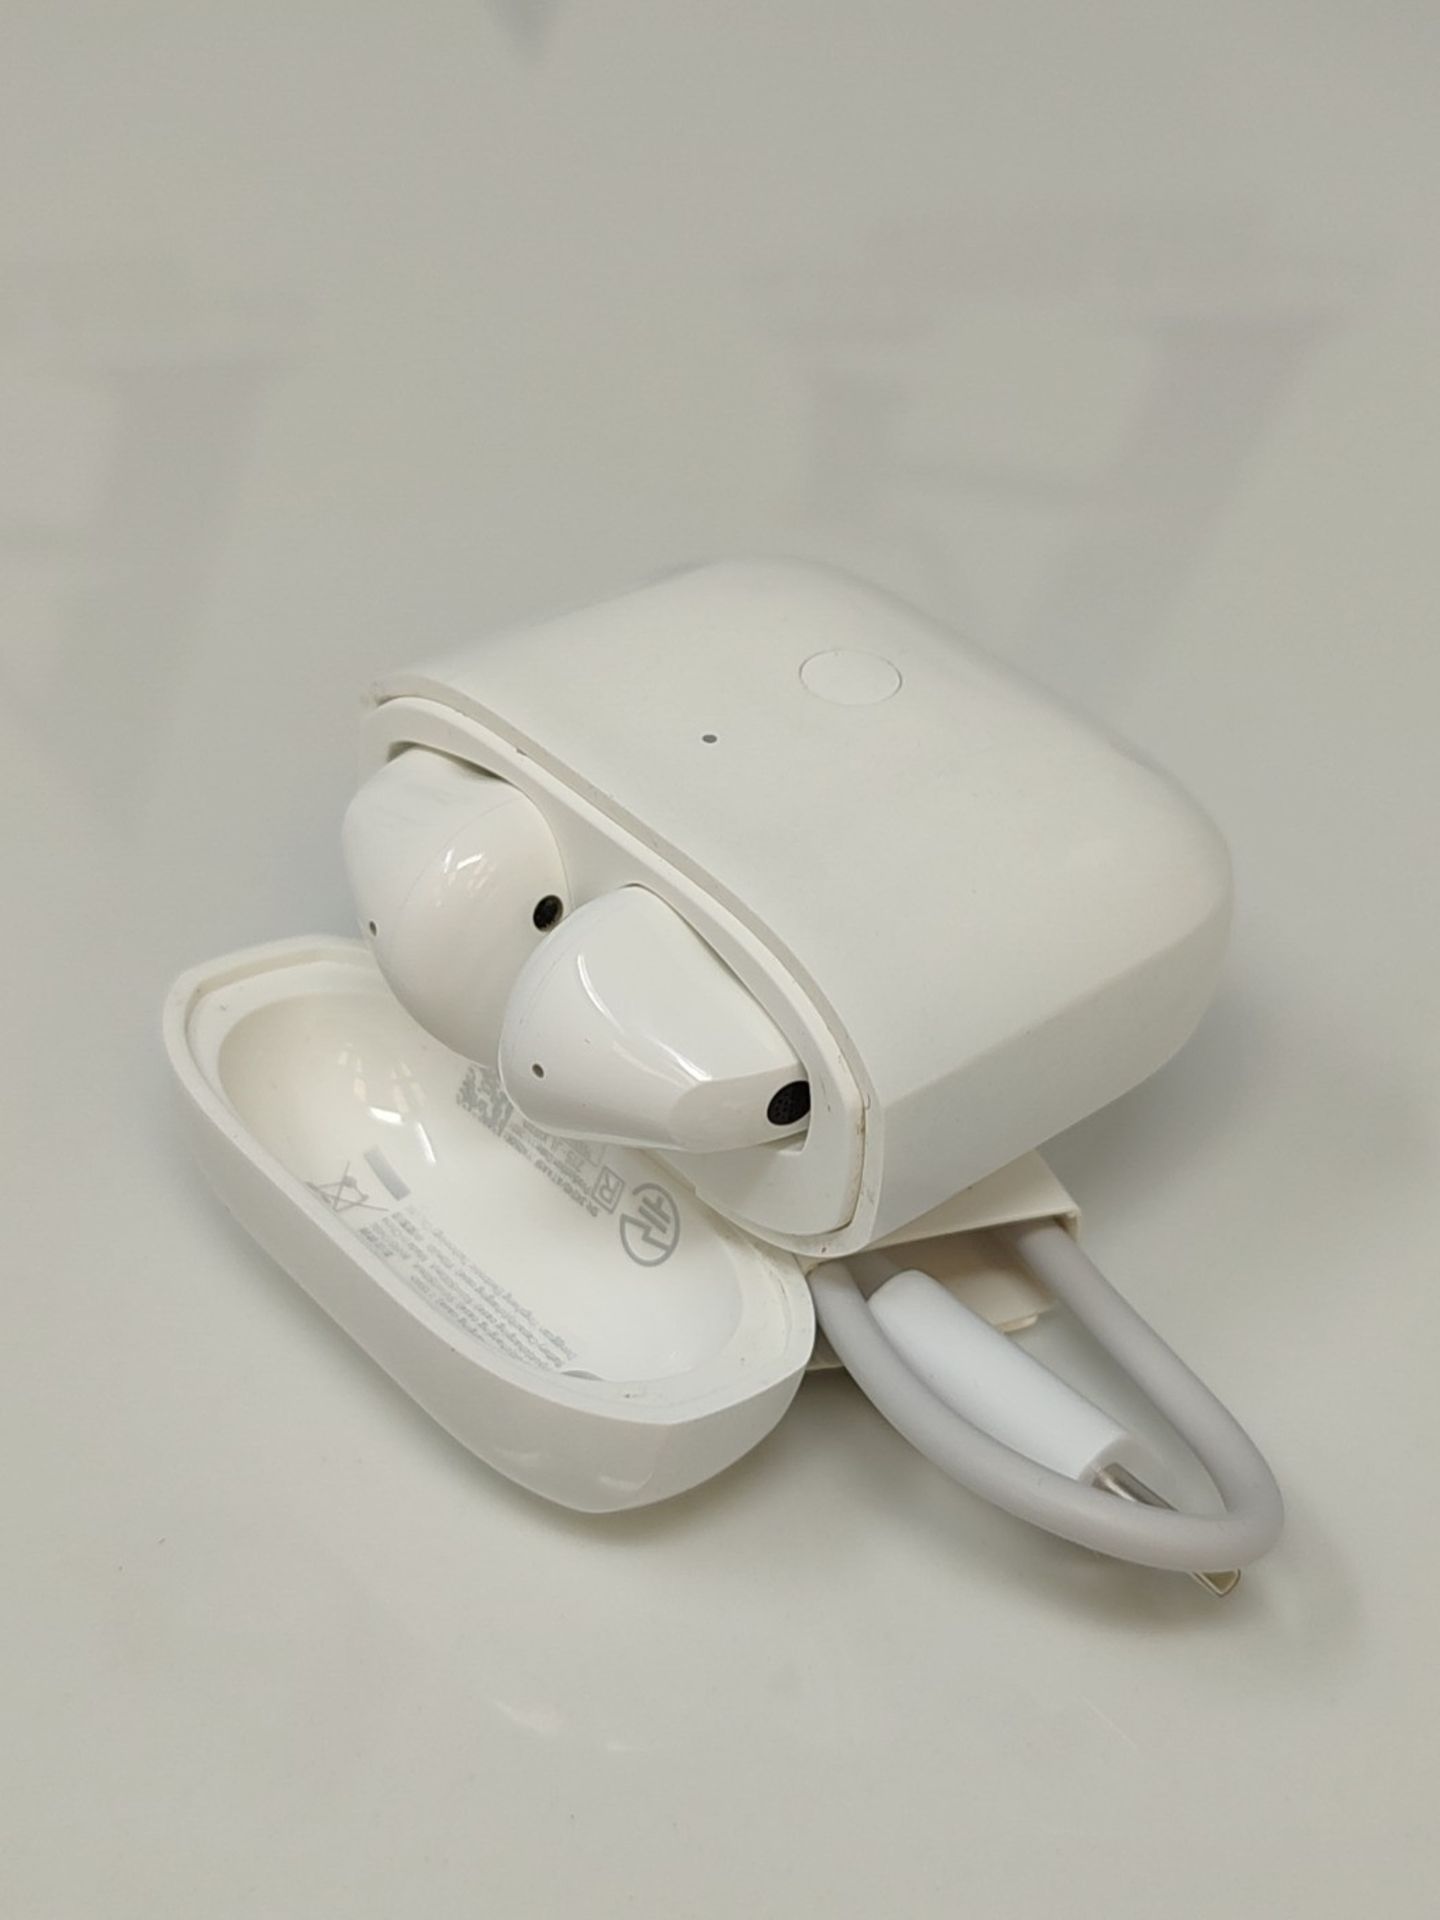 Xiaomi Redmi Buds 3 Wireless Earbuds, Qualcomm QCC3040 BLUETOOTH chipset, 12mm dynamic - Image 3 of 3